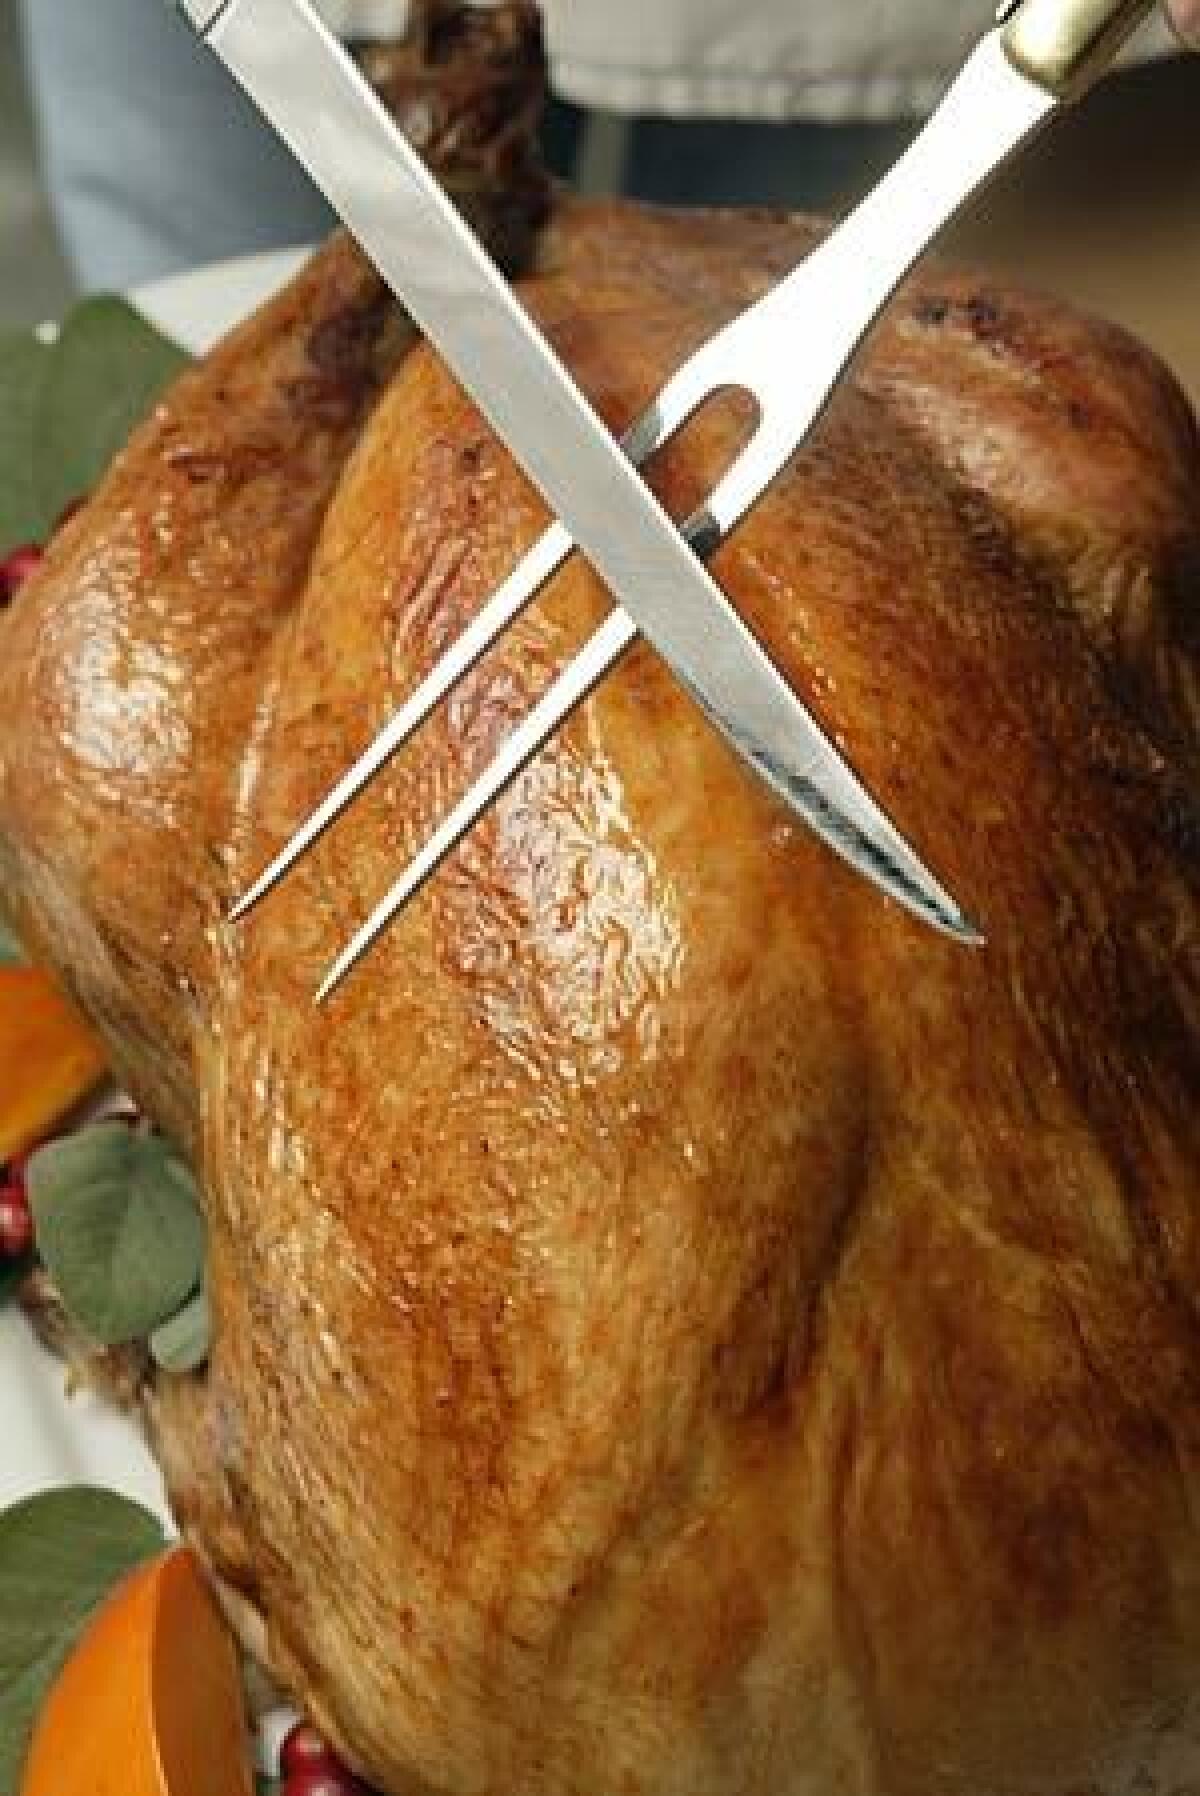 His Laguiole carving set guarantees him the primo Thanksgiving task: slicing the turkey.